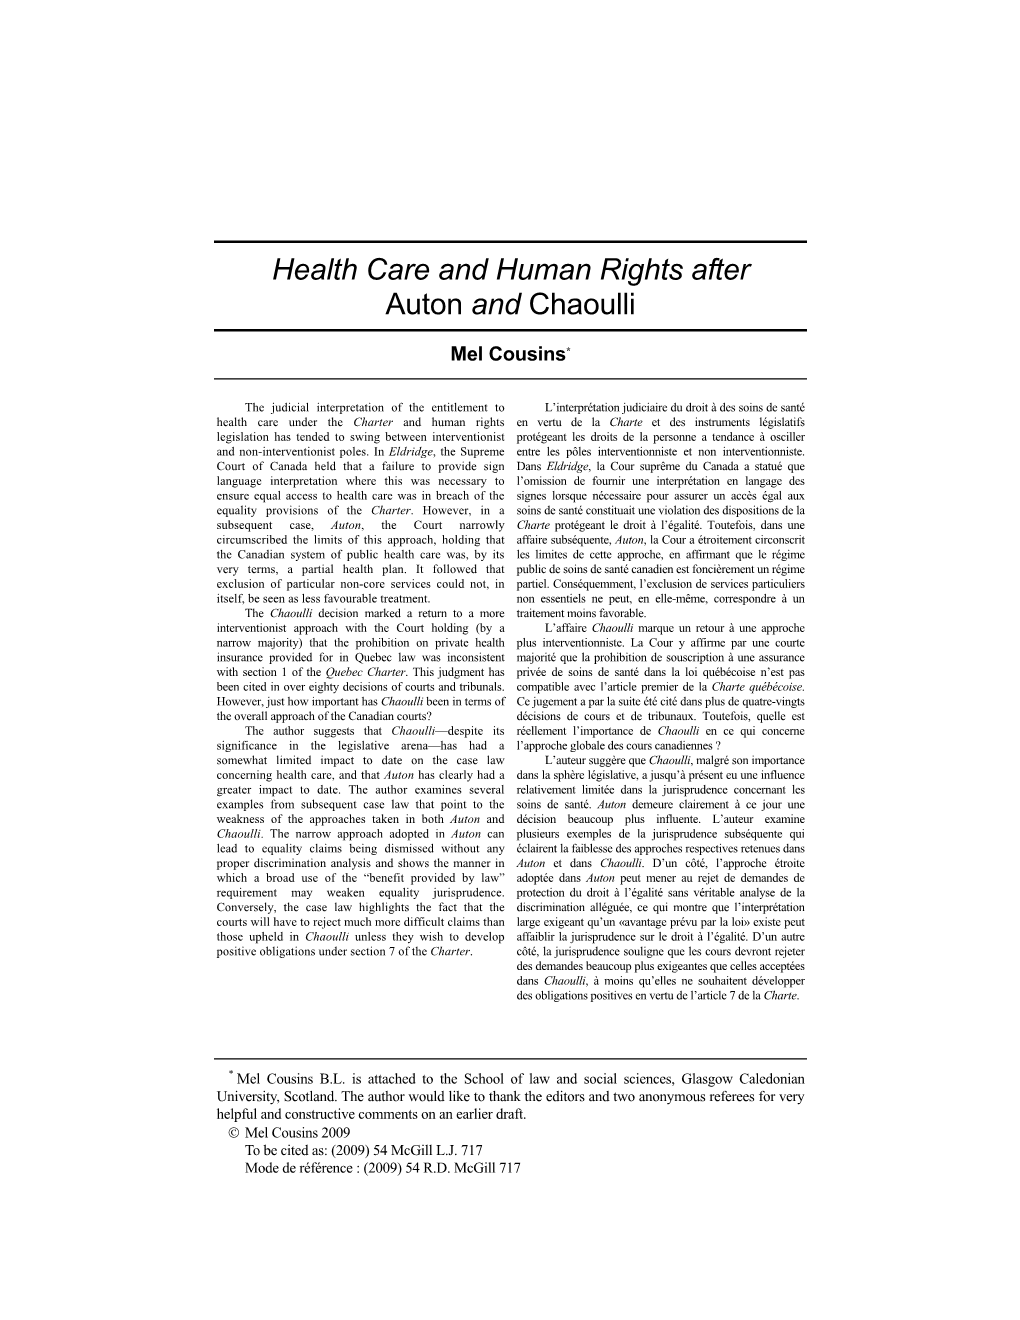 Health Care and Human Rights After Auton and Chaoulli